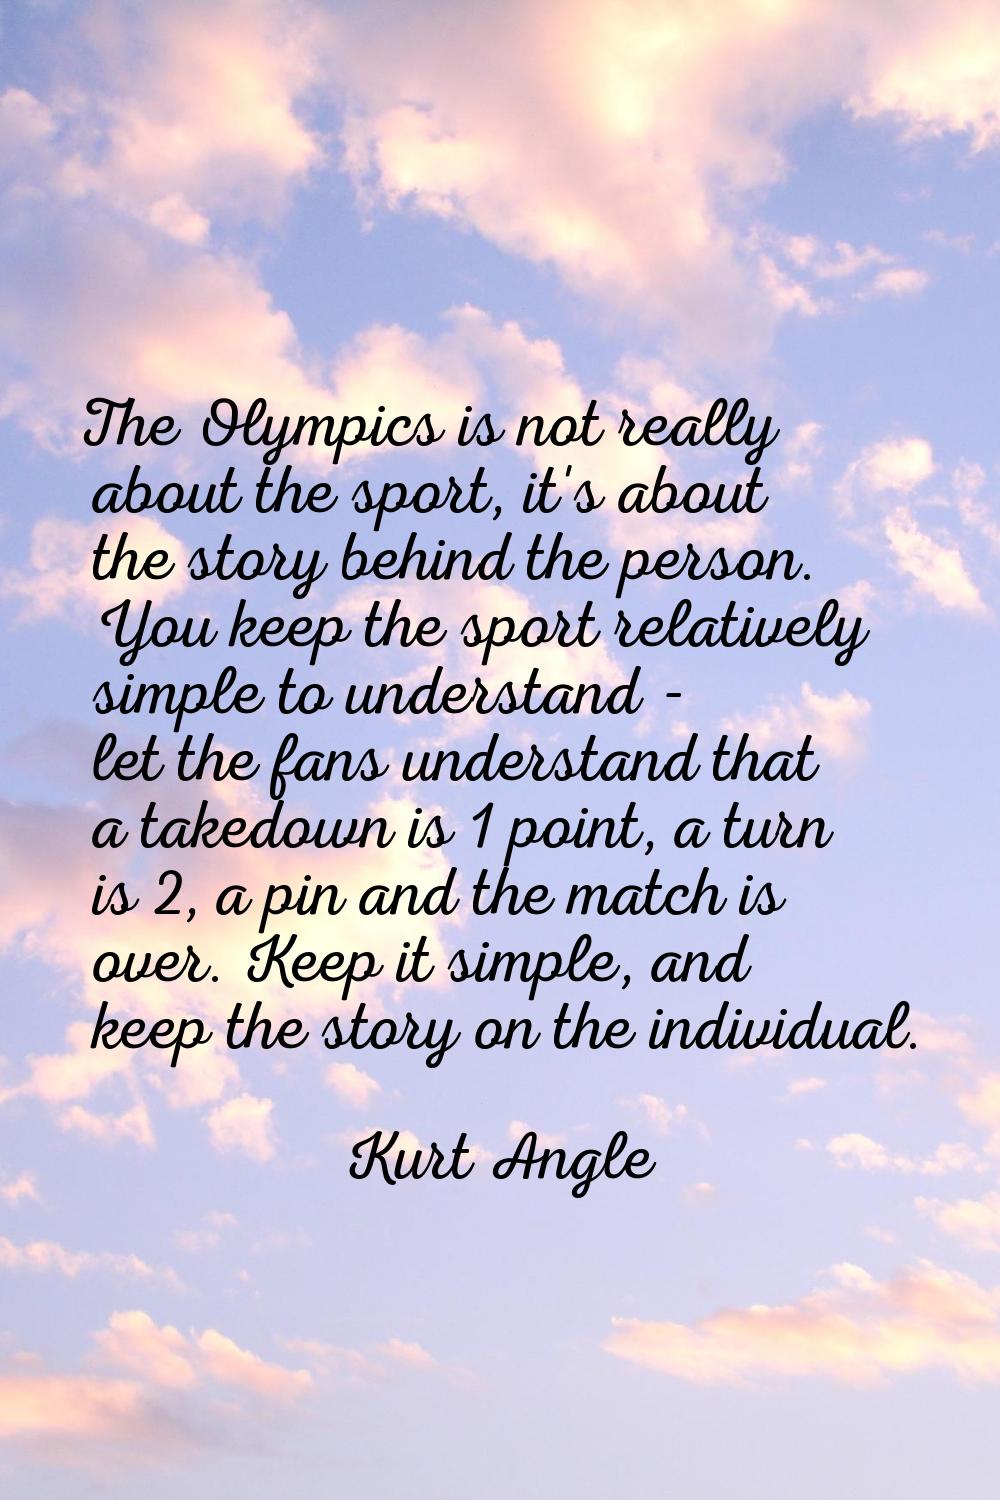 The Olympics is not really about the sport, it's about the story behind the person. You keep the sp